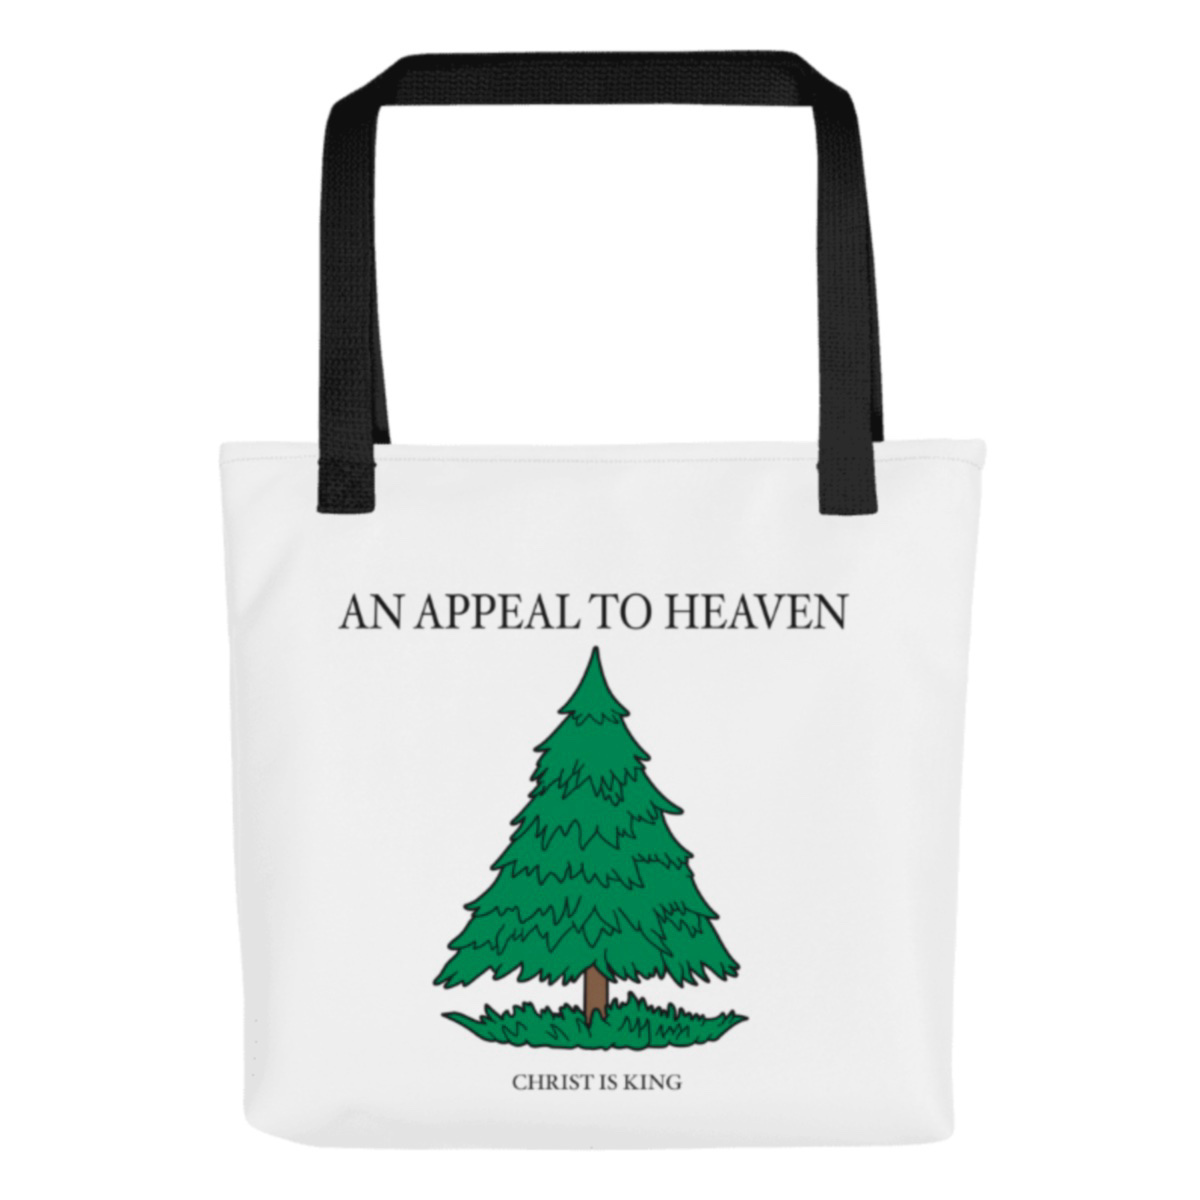 An Appeal To Heaven Tote Bag